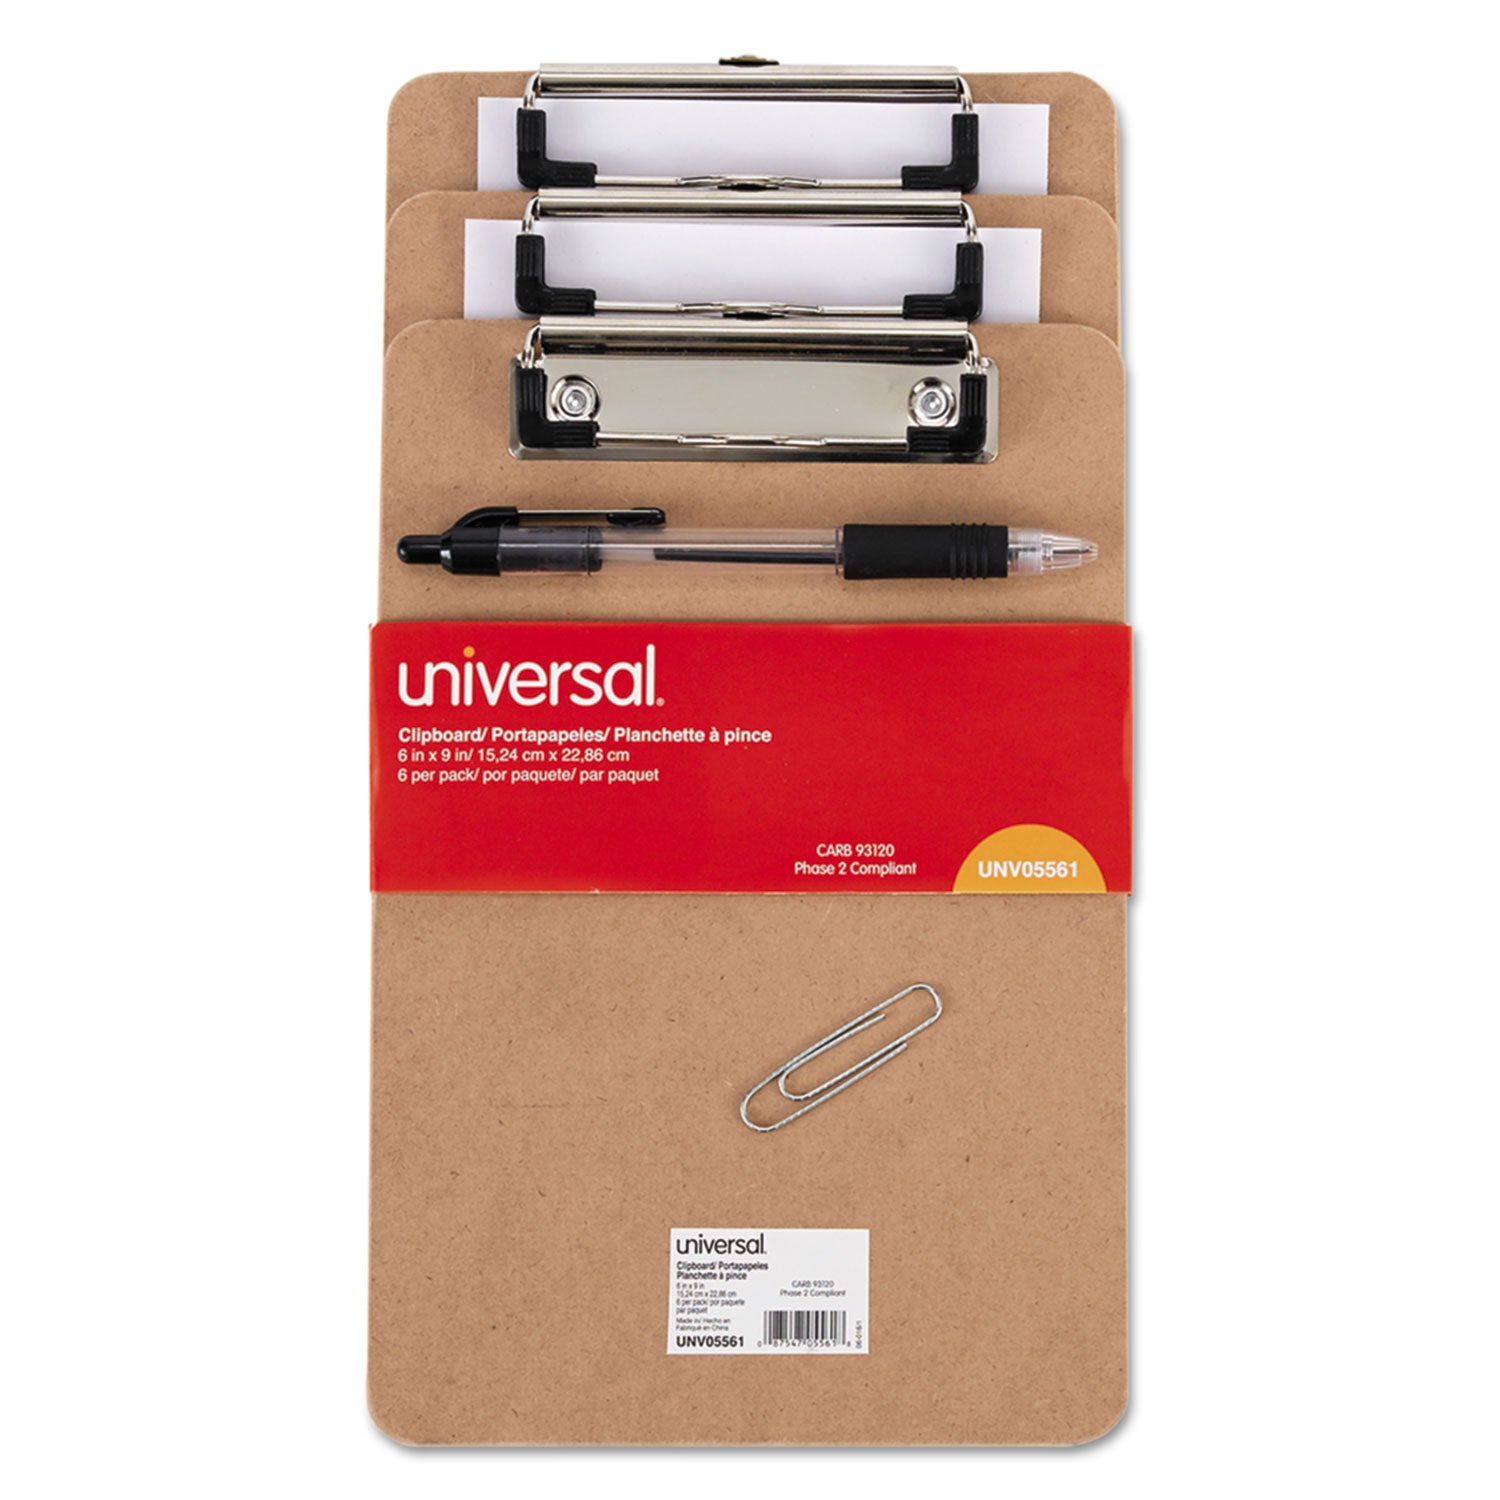 hardboard-clipboard-with-low-profile-clip-05-clip-capacity-holds-5-x-8-sheets-brown-6-pack_unv05561 - 2